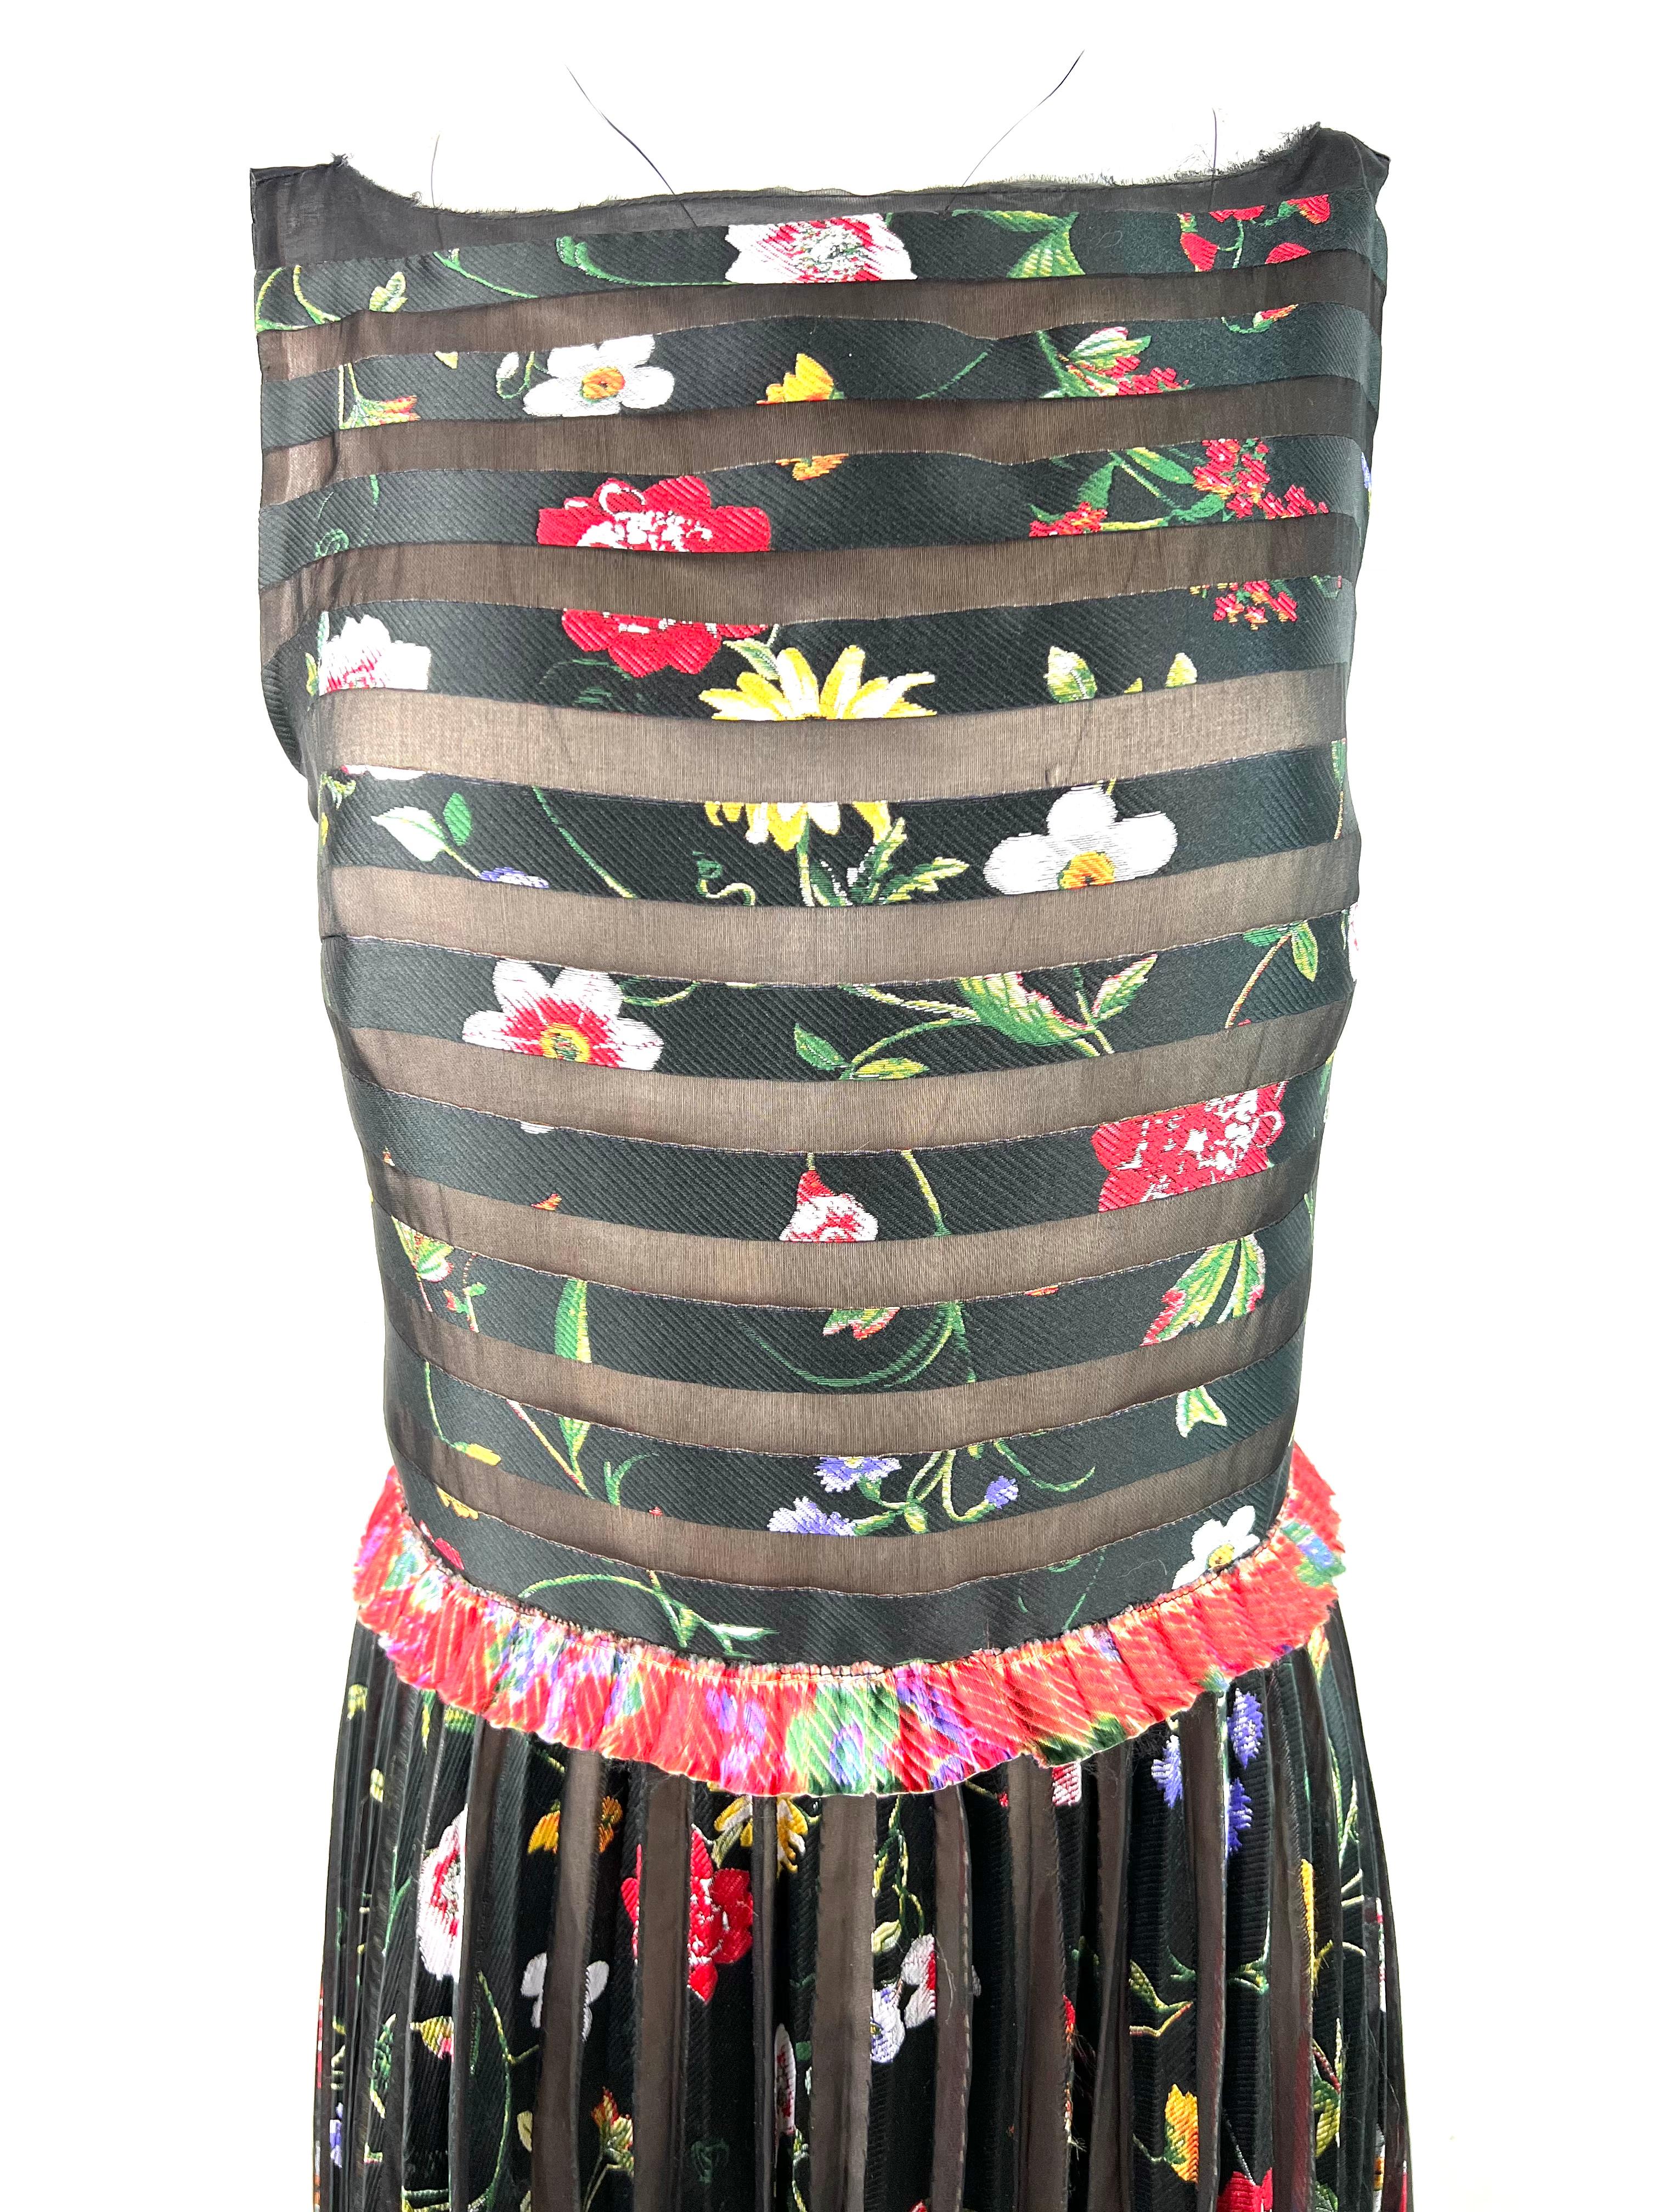 Product details:

The dress features sleeveless style with multicored floral and striped pattern design, floor length.